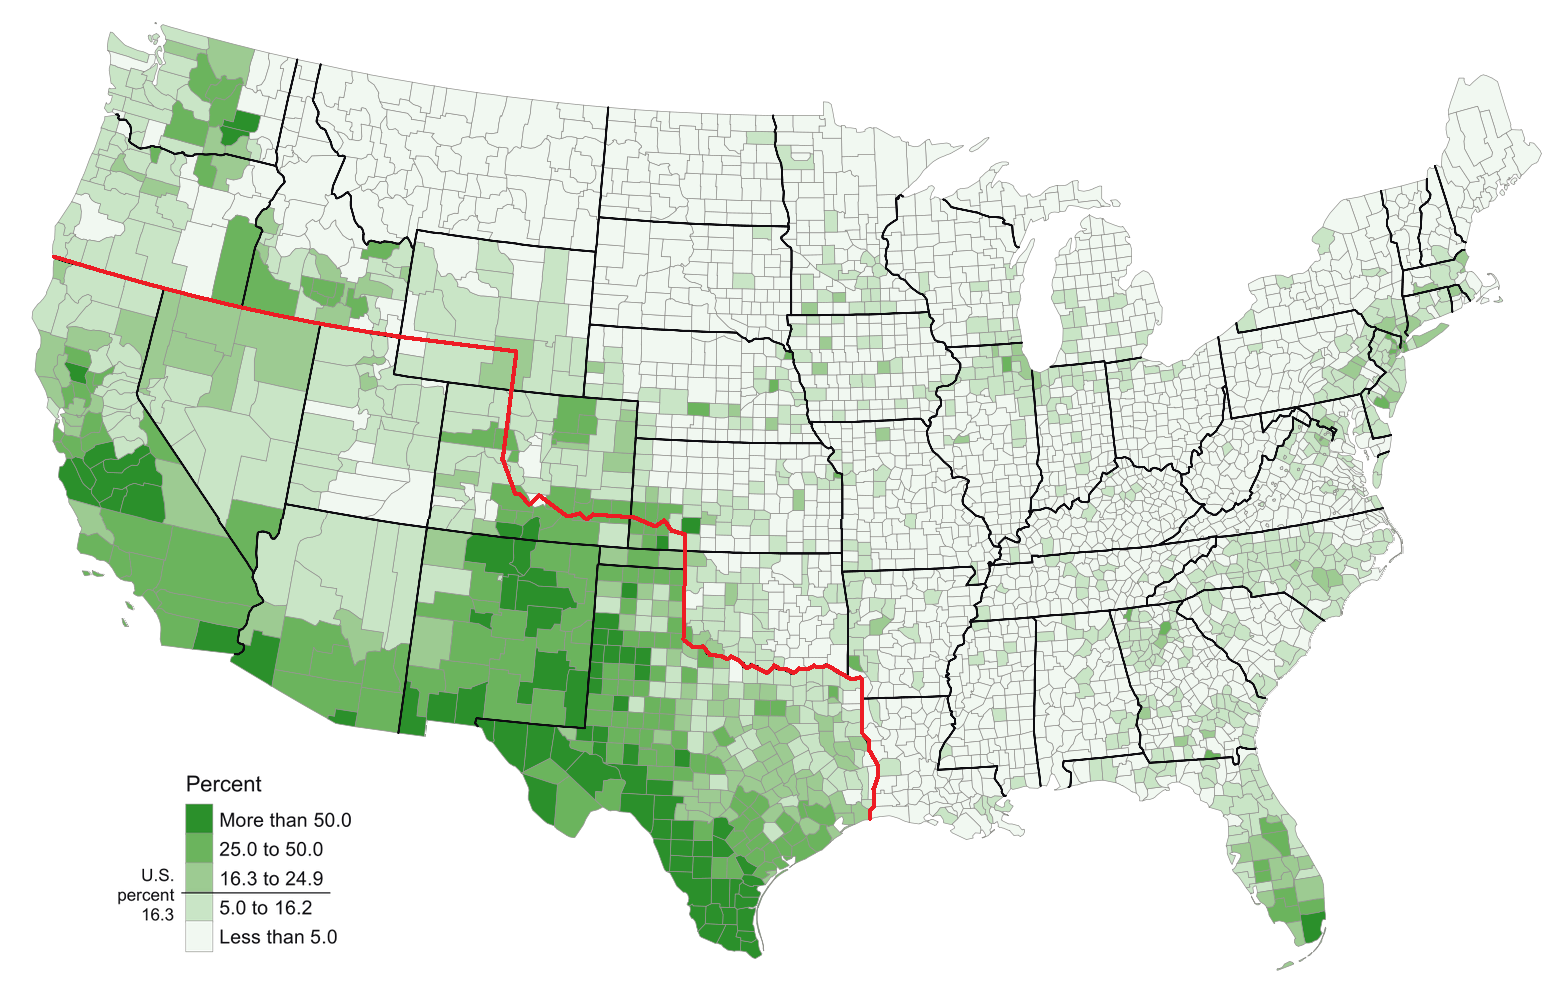 Hispanic_population_in_the_United_States_and_the_former_Mexican-American_border.png